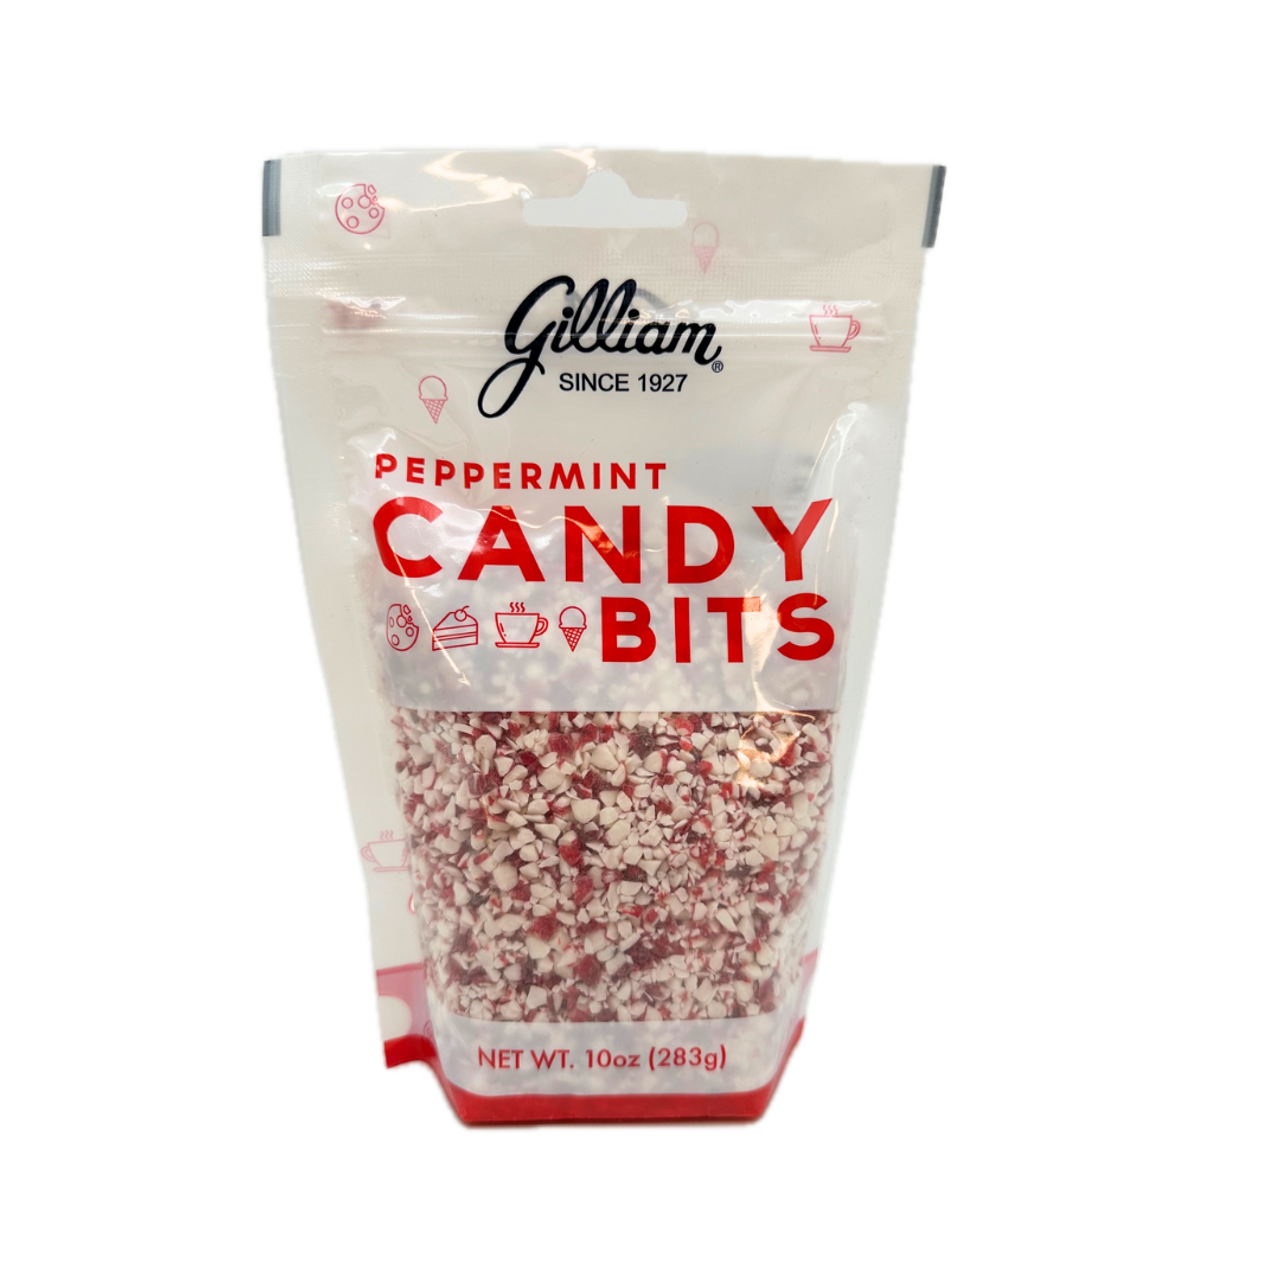 Gilliam Peppermint Candy Bits 10oz - 12ct